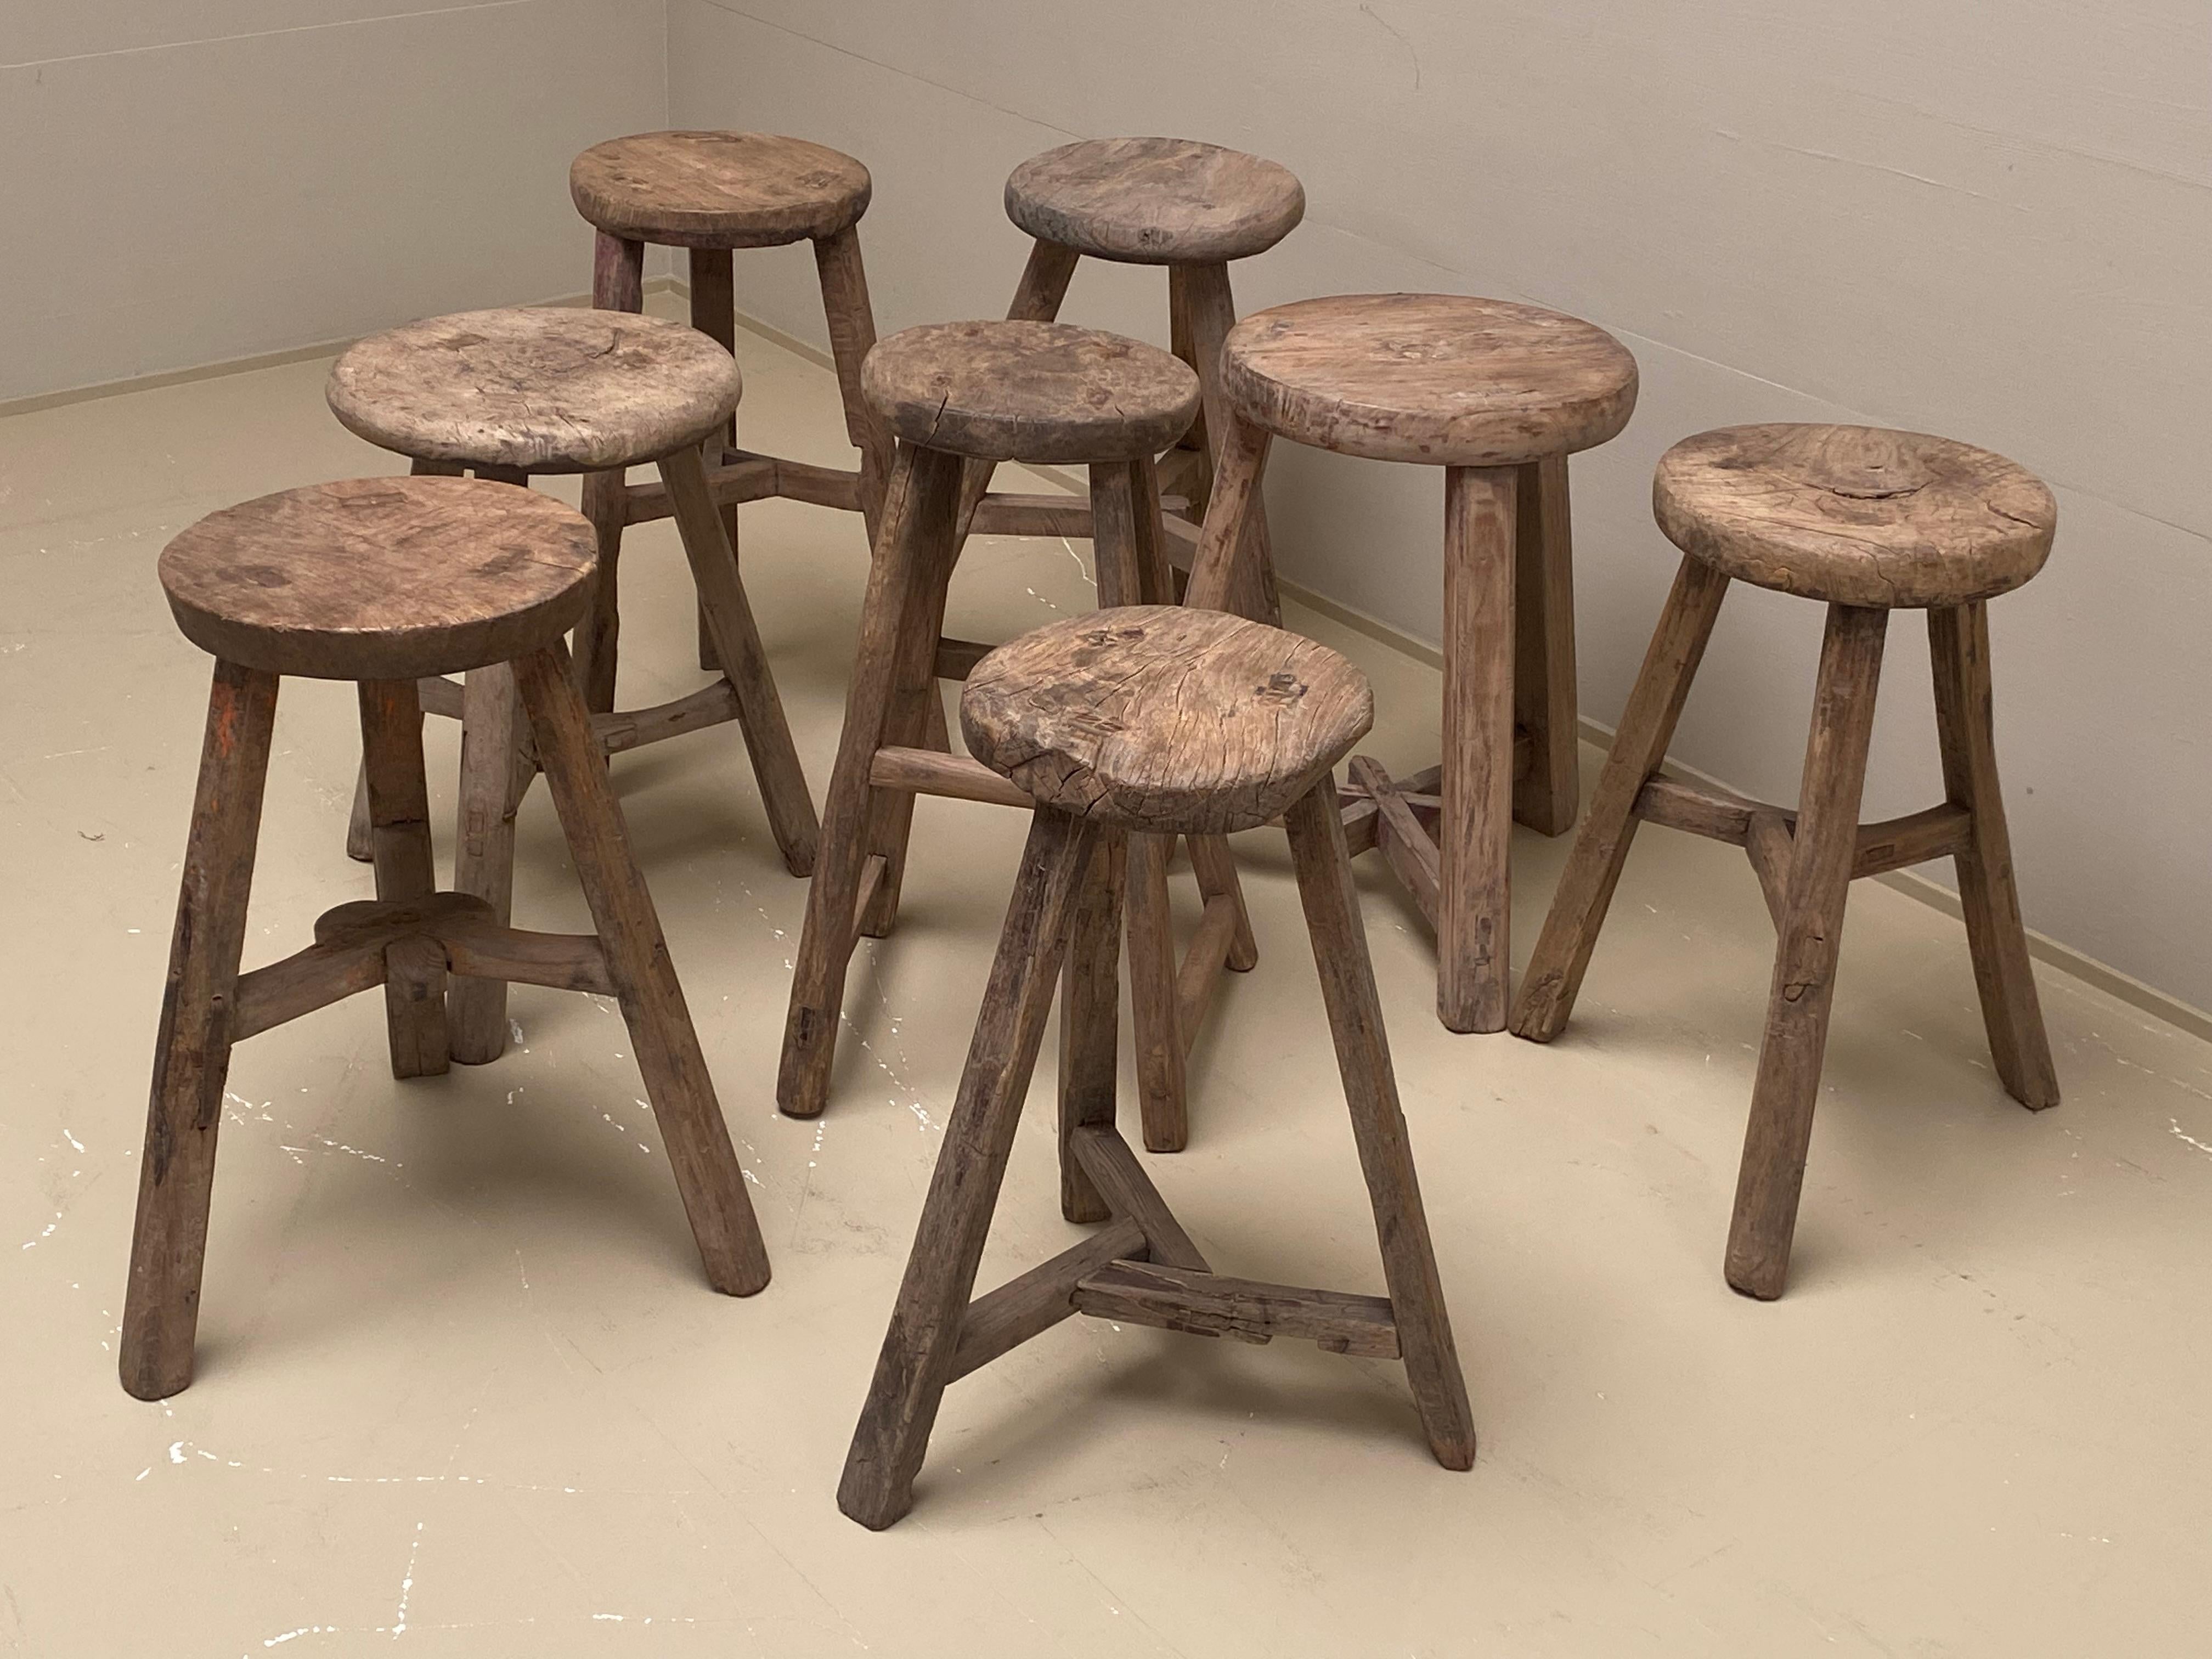 Brutalist Bleached Elm round Stools from China,1960 ties,
Beautiful antique patina with weathering and age,
Can be used as a side table or as a stool or as a drink table.
Great to be used in any space,
Each piece is really unique and some of